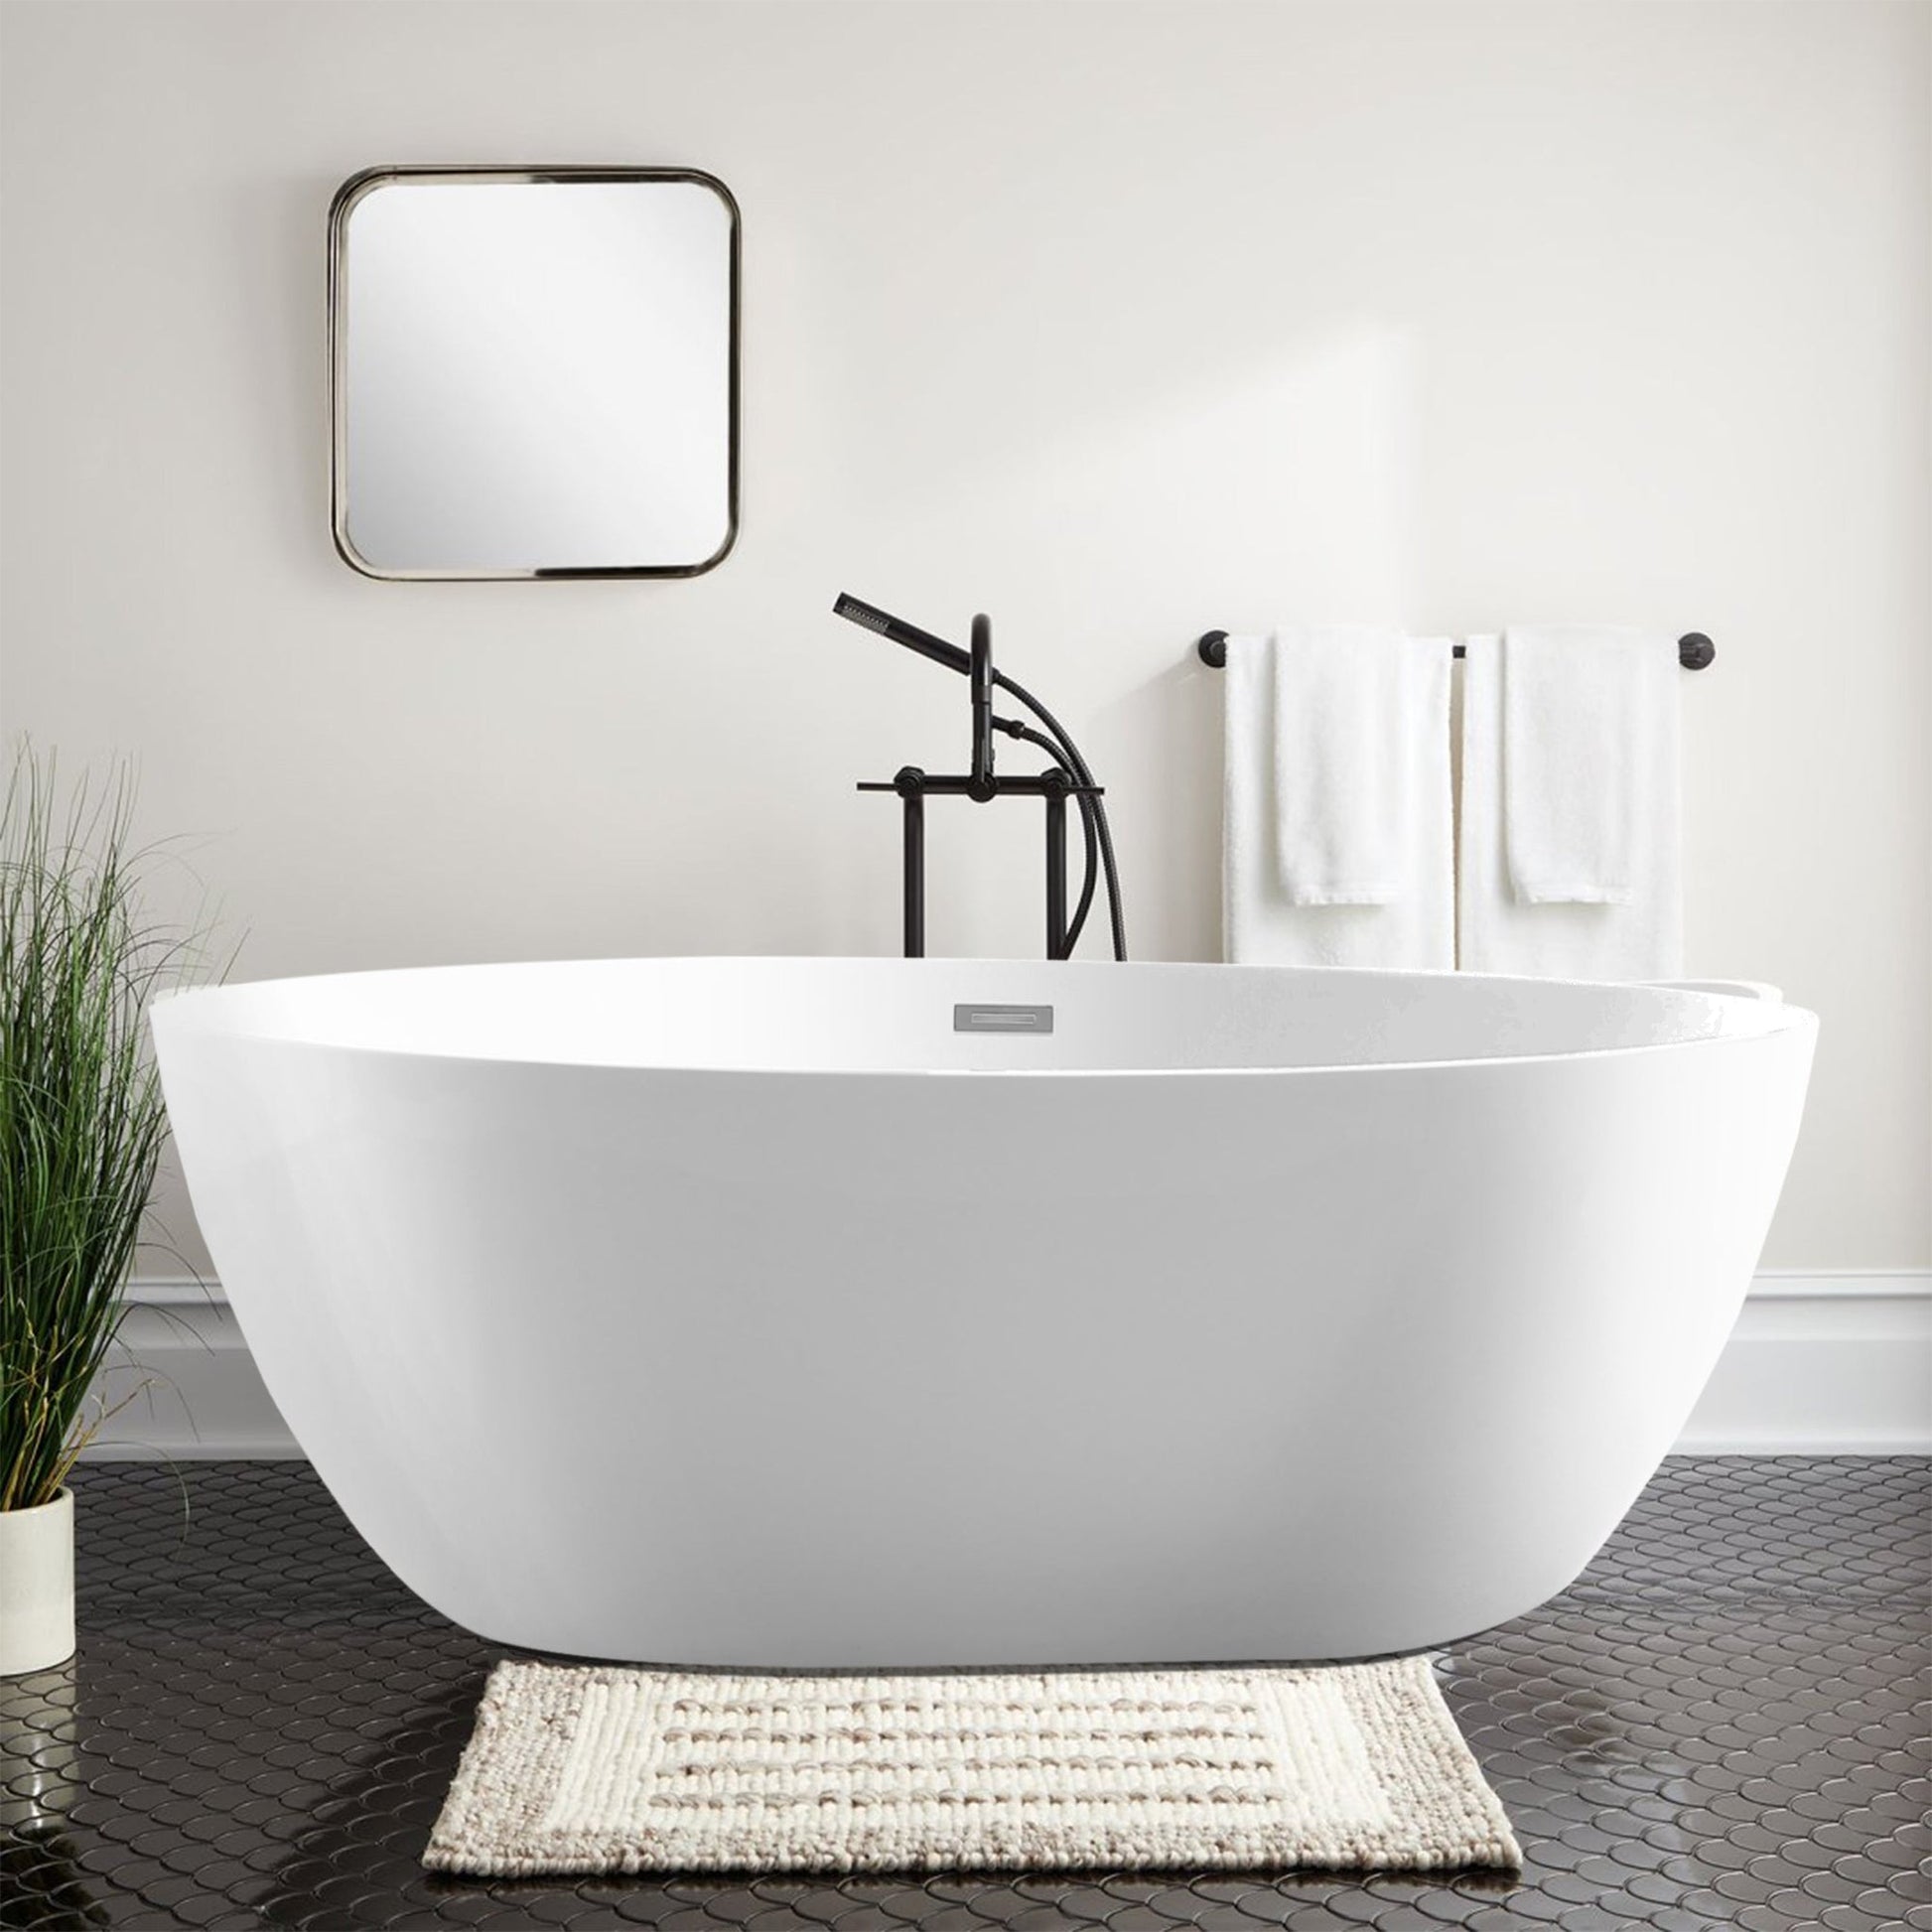 Vanity Art 55" x 32" White Contemporary Design Soaking Bathtub With Polished Chrome Slotted Overflow and Pop-up Drain